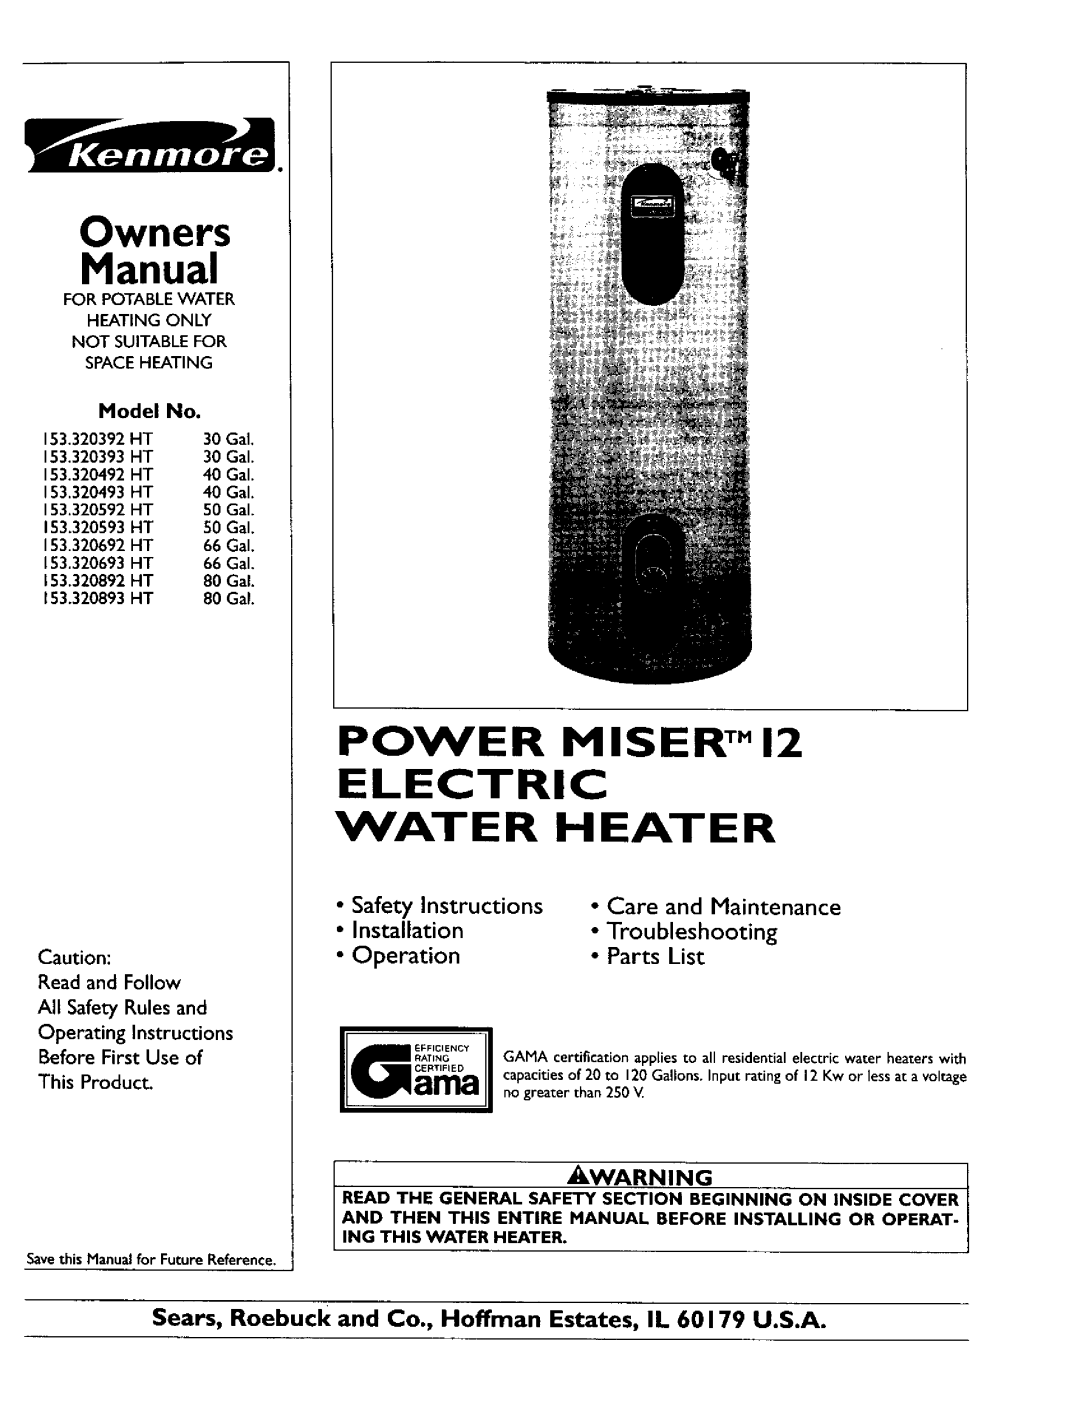 Kenmore 153.320893 HT owner manual Installation, Model, i, WARNING, Owners, Manual, Power Miser Tm Lectric Water Heater 